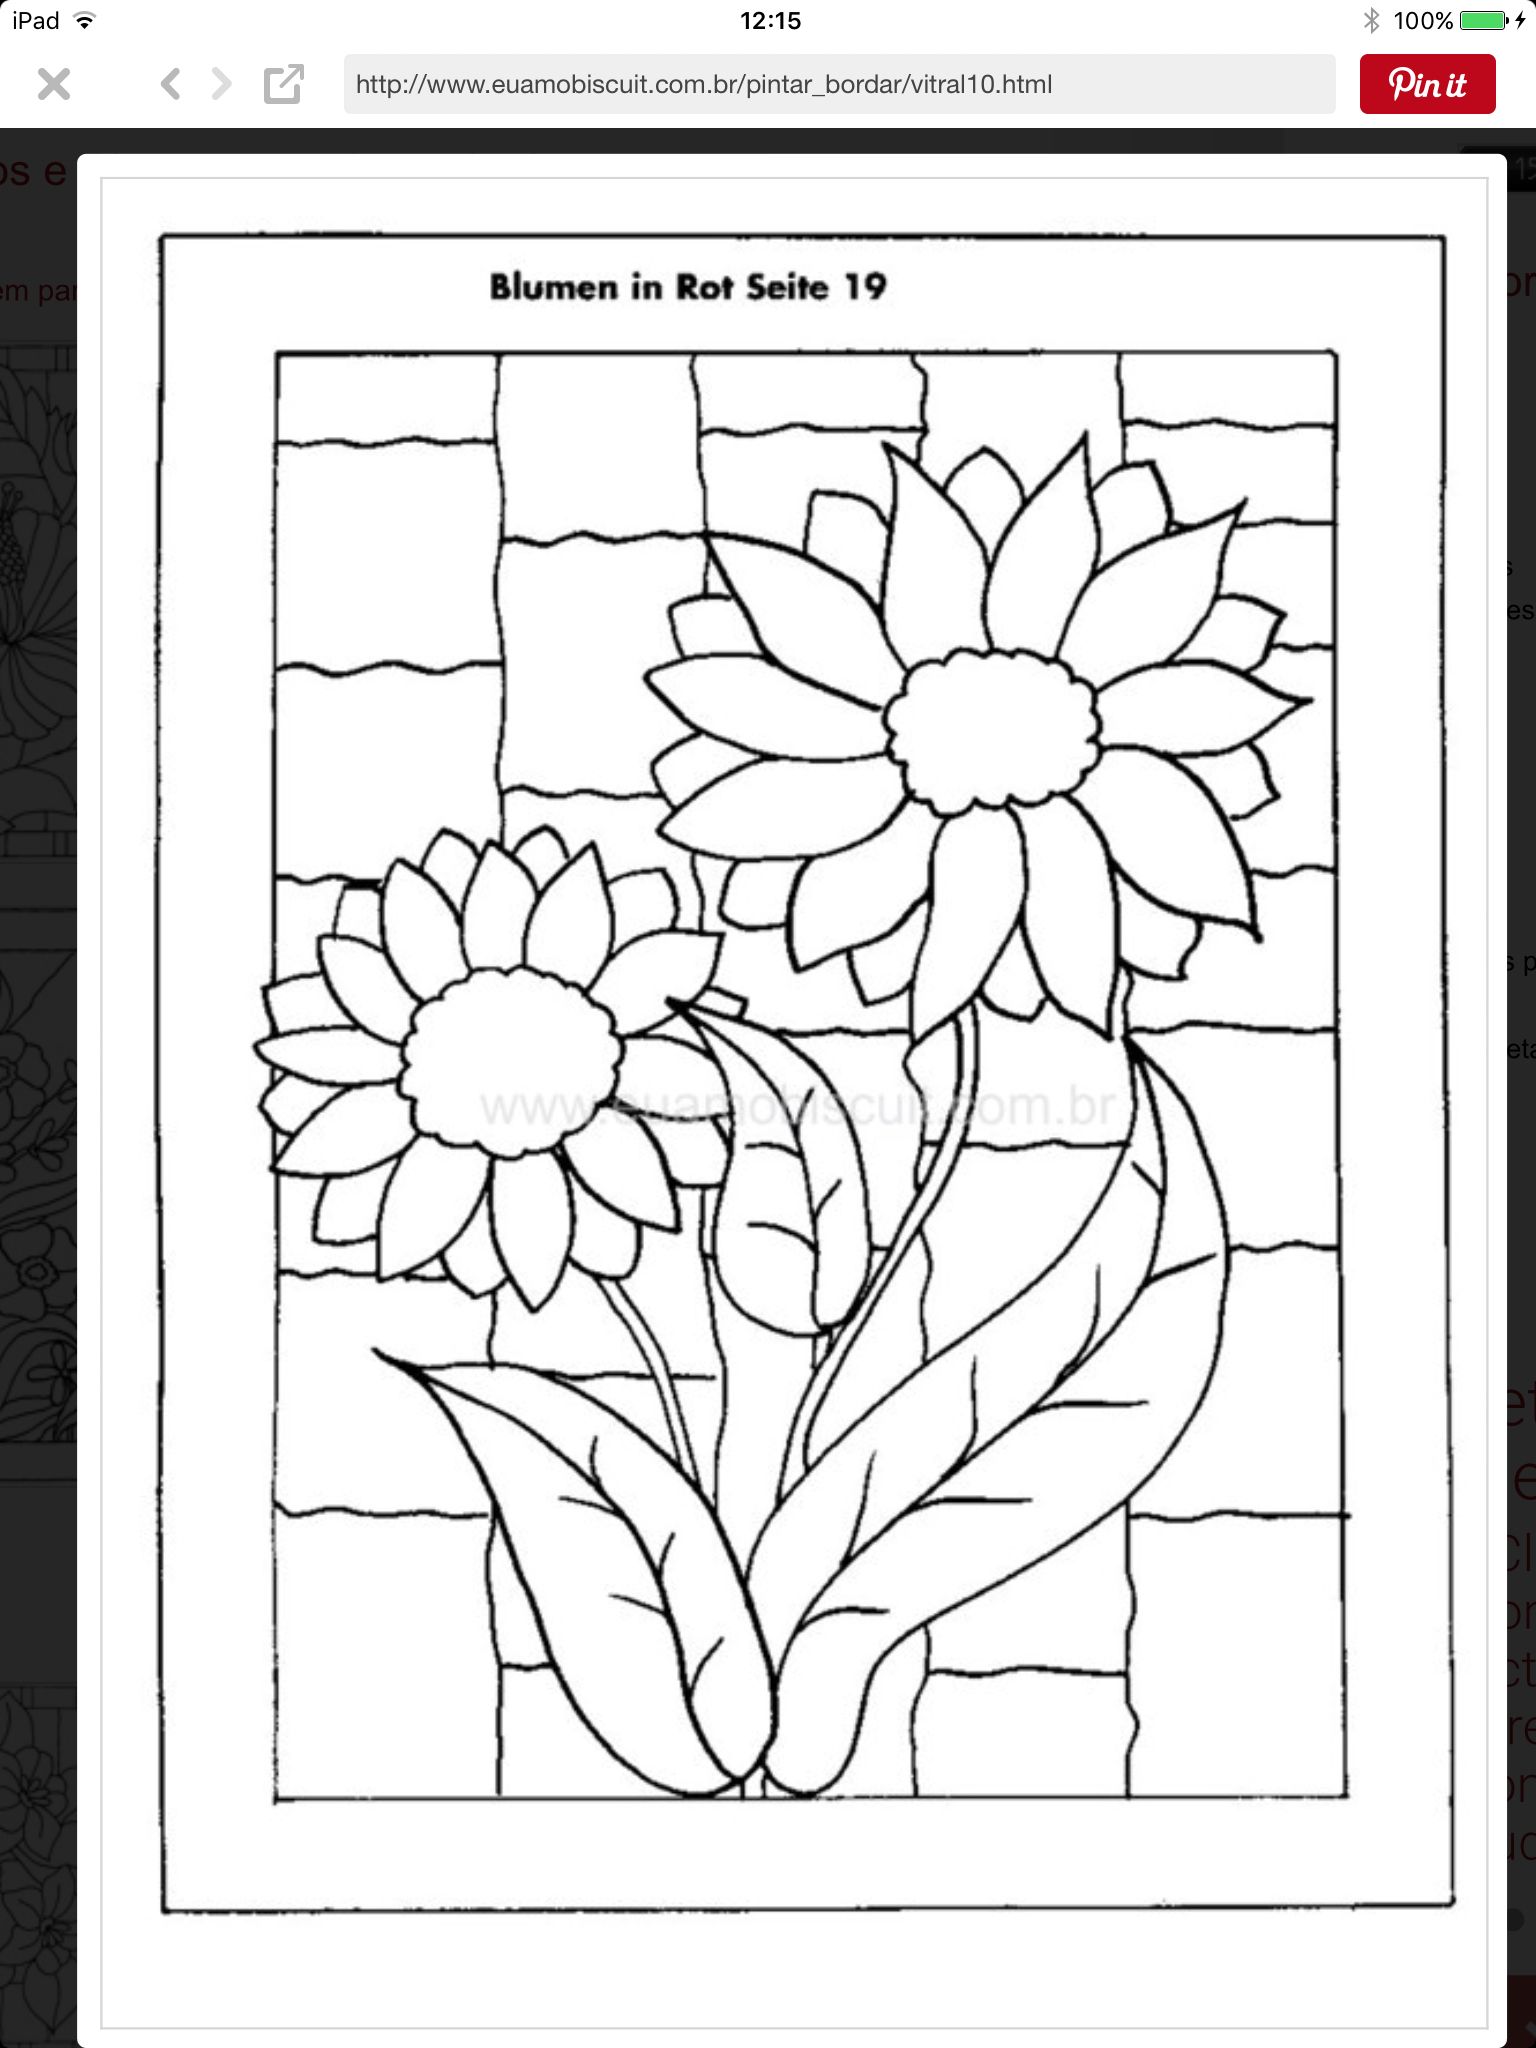 Use for miniature faux stained glass glass painting patterns painting patterns stained glass patterns